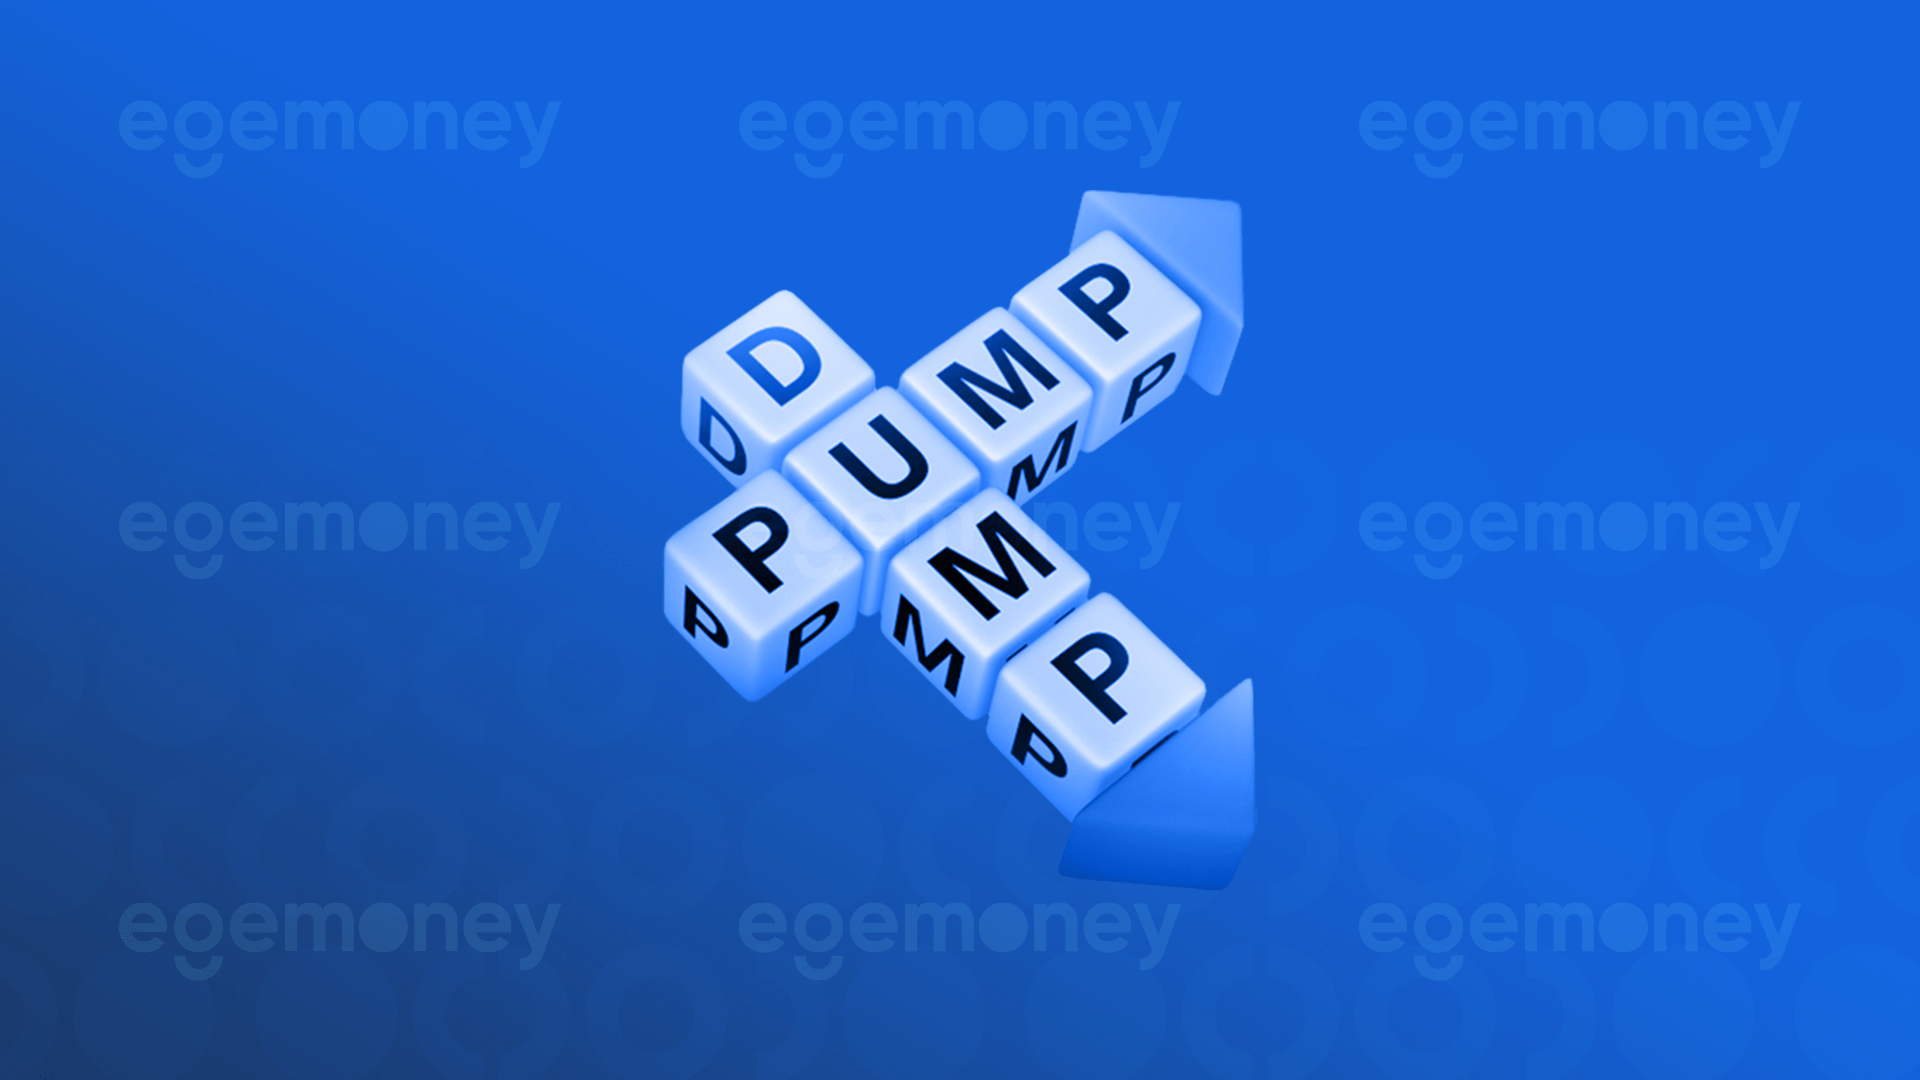 What is Pump? What is Dump?